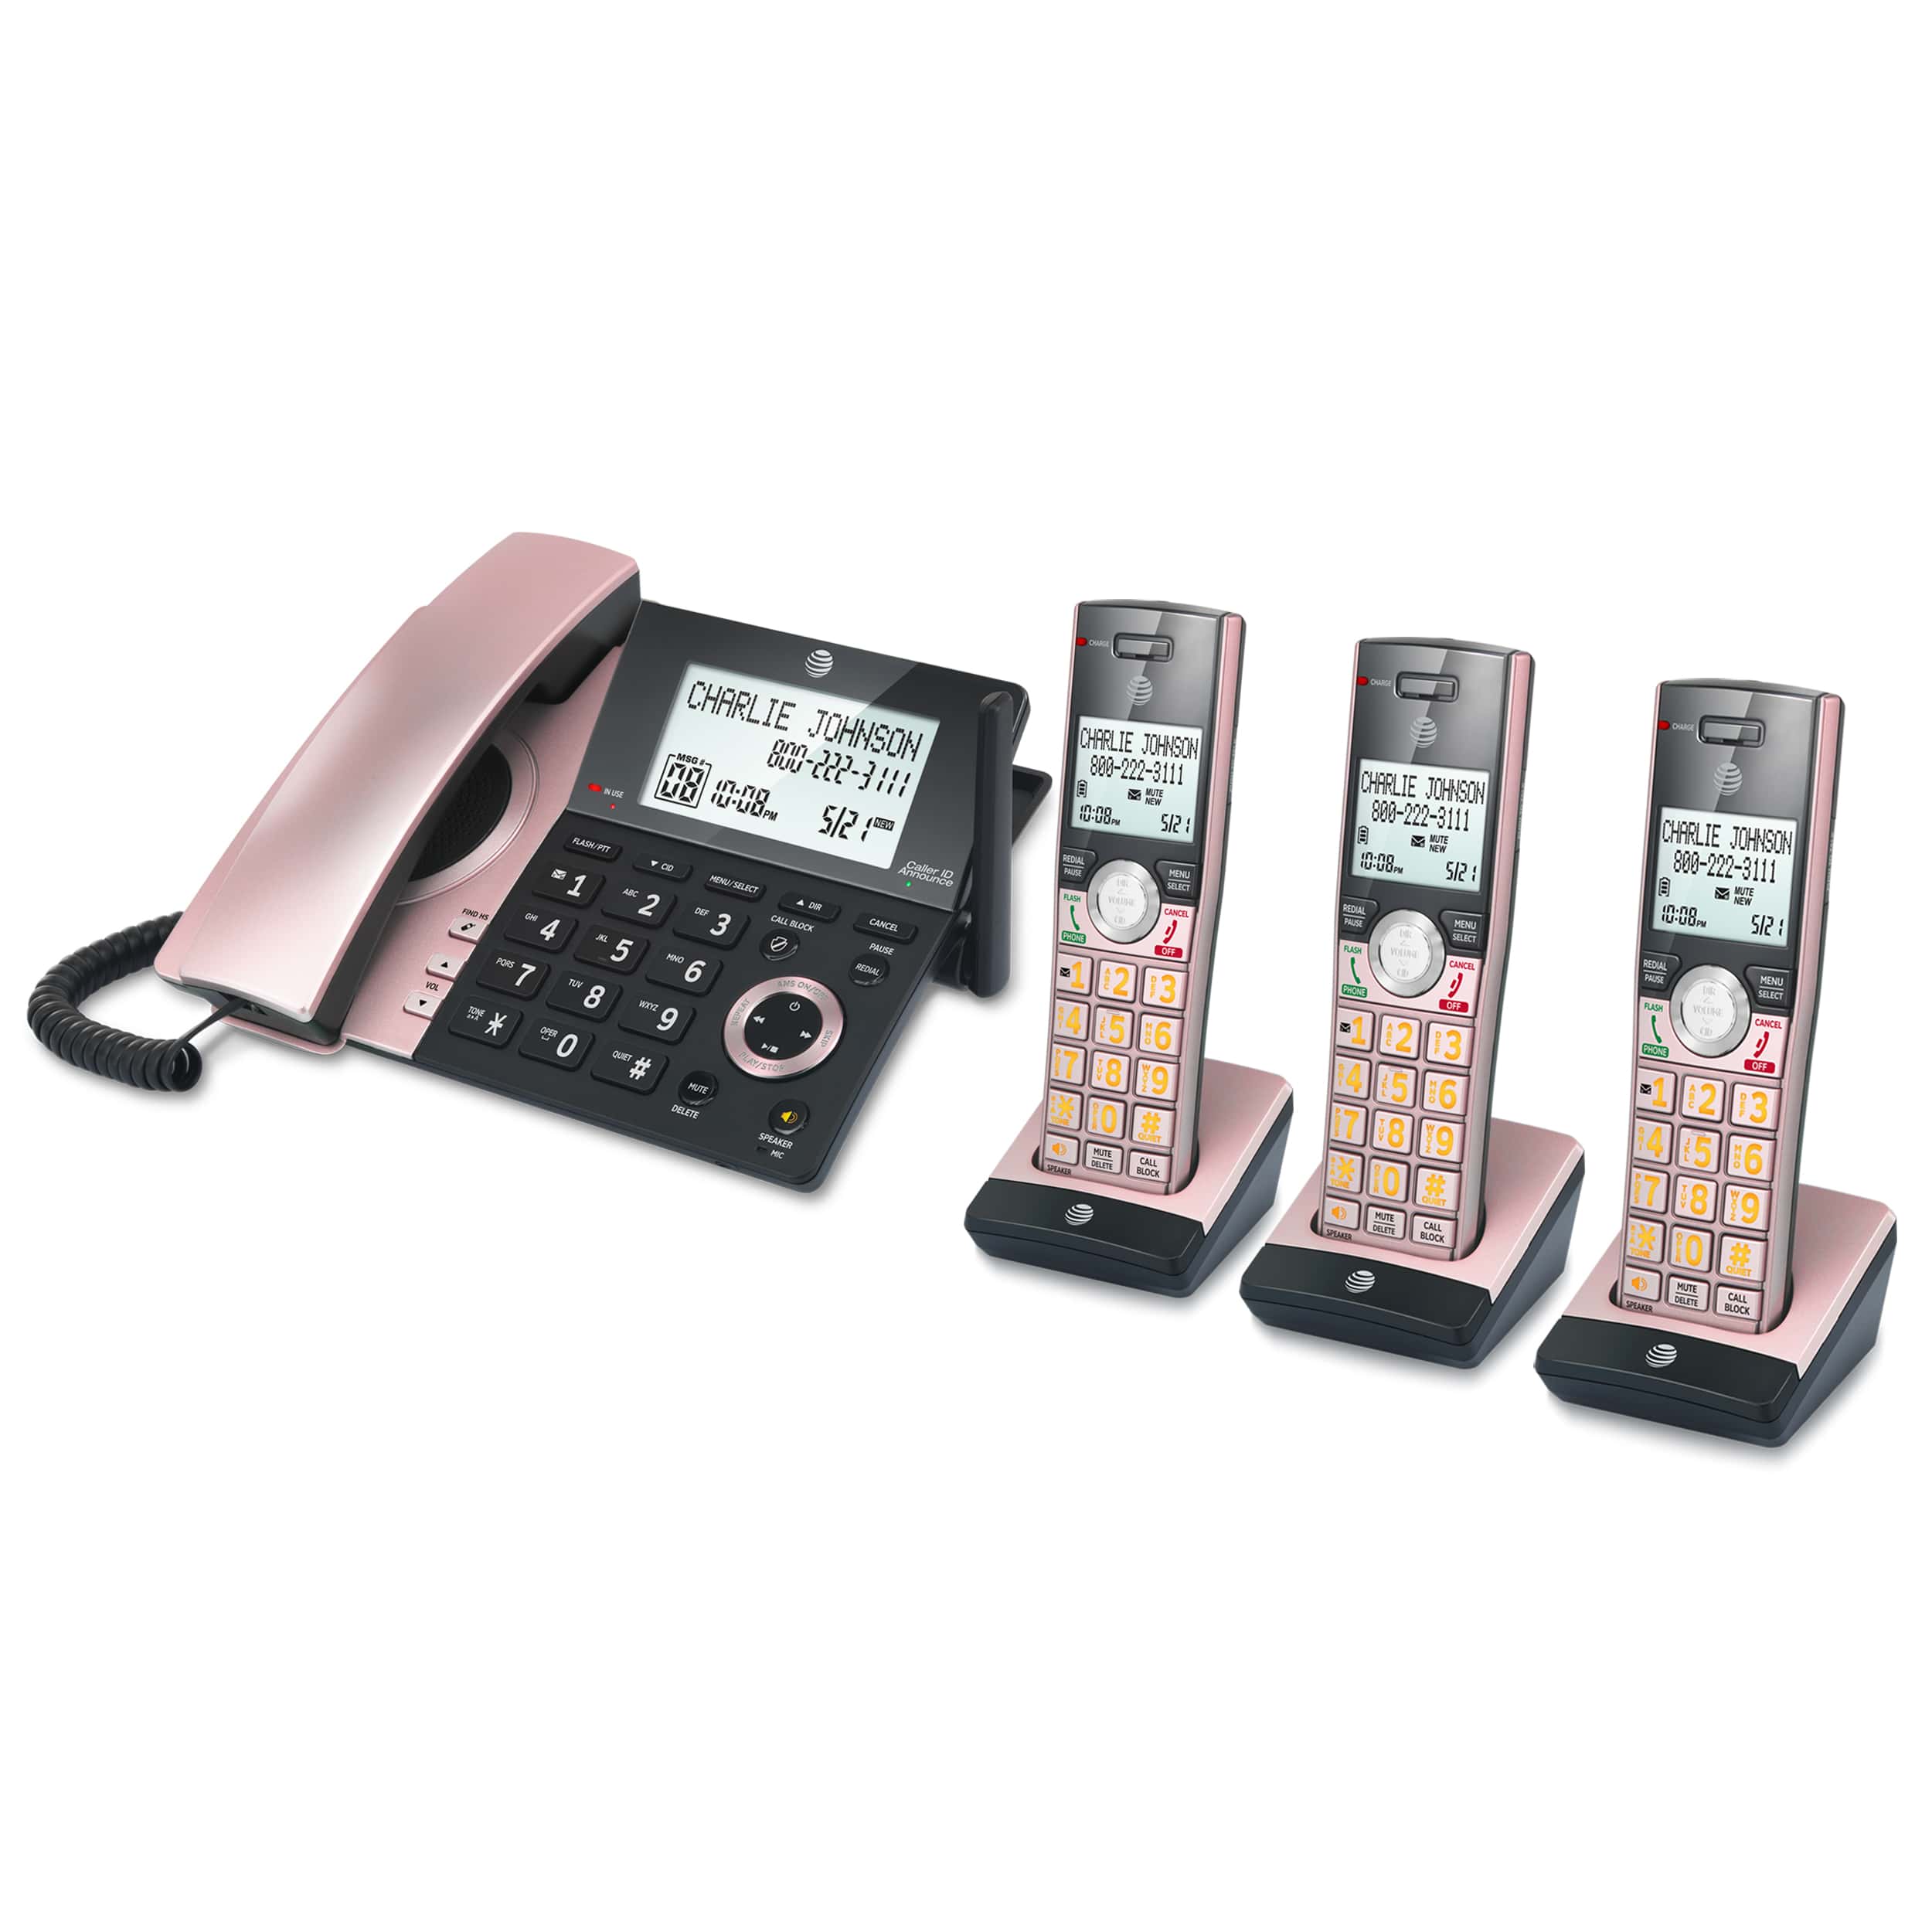 3 handset corded/cordless phone system with smart call blocker (Rose Gold/Black) - view 3